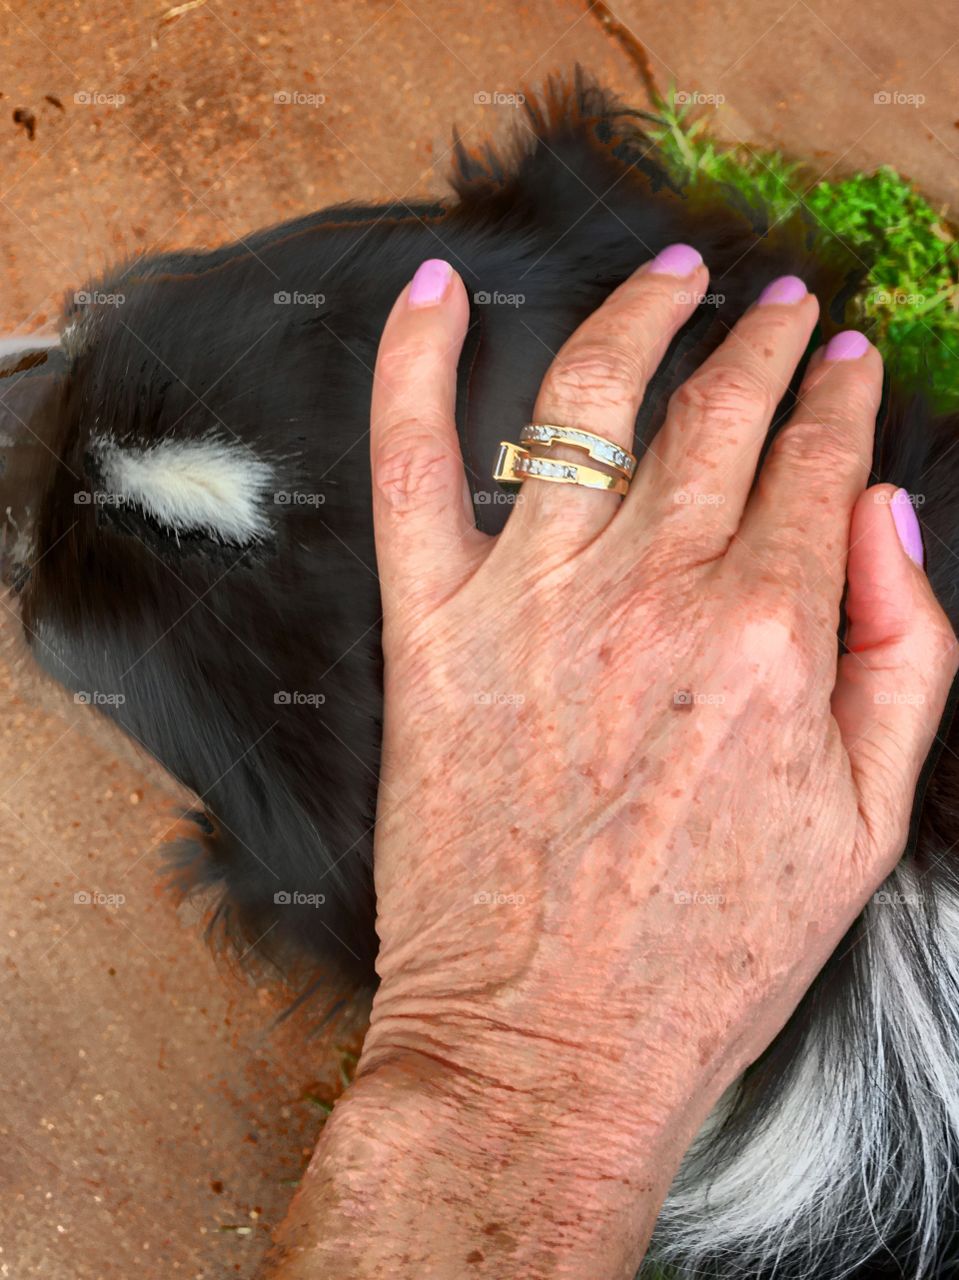 Woman with ageing hands, liver spots and wrinkled petting a border collie